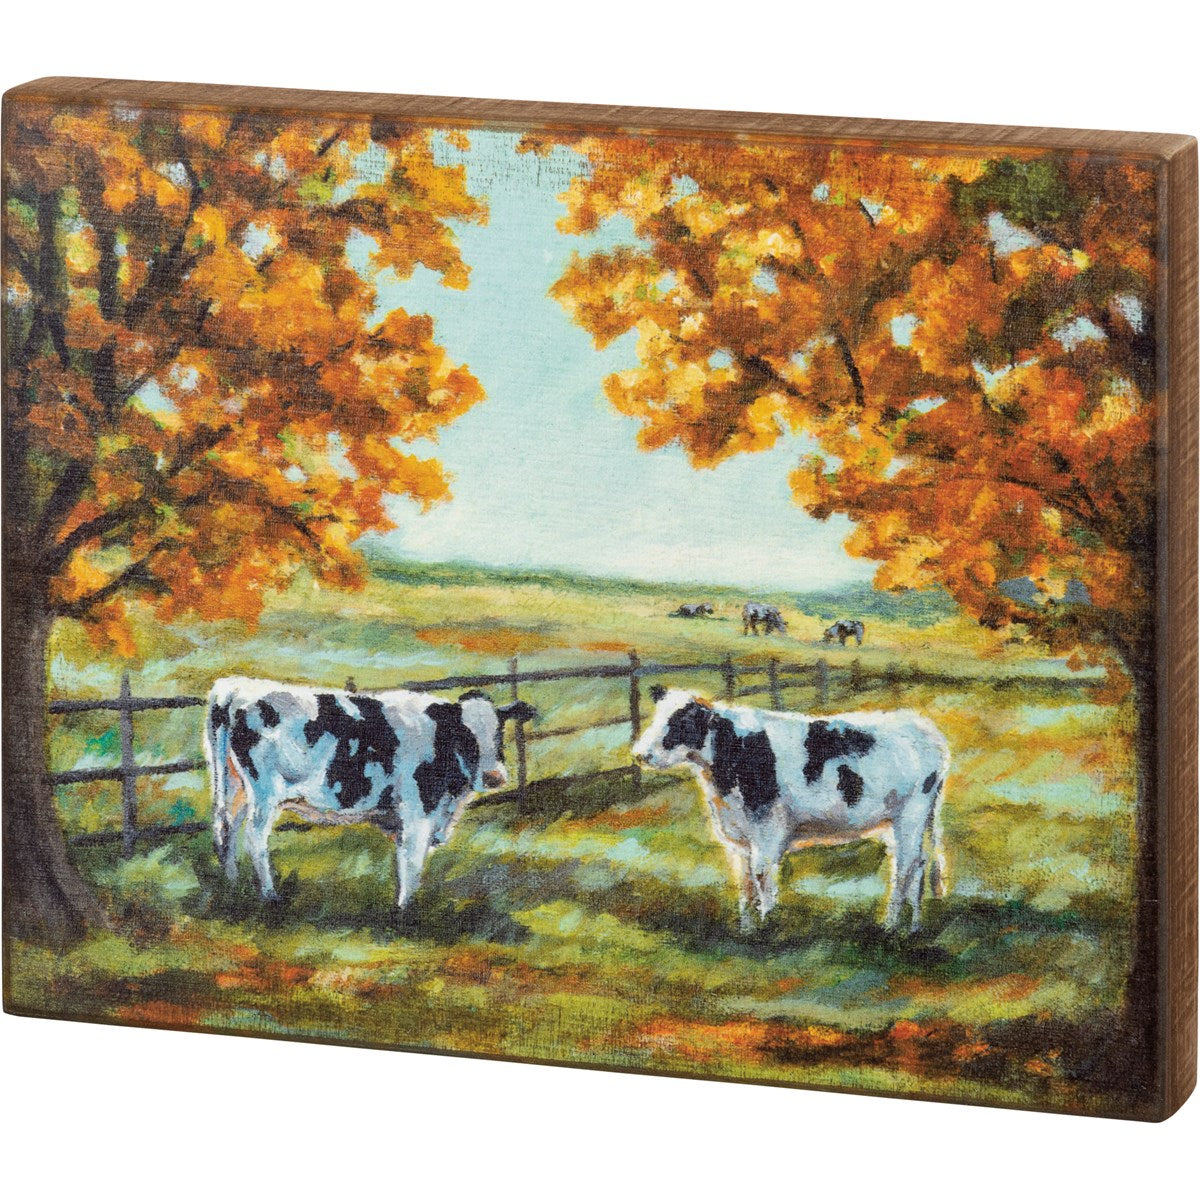 Cows in a Fall Field 15" Boxed Sign